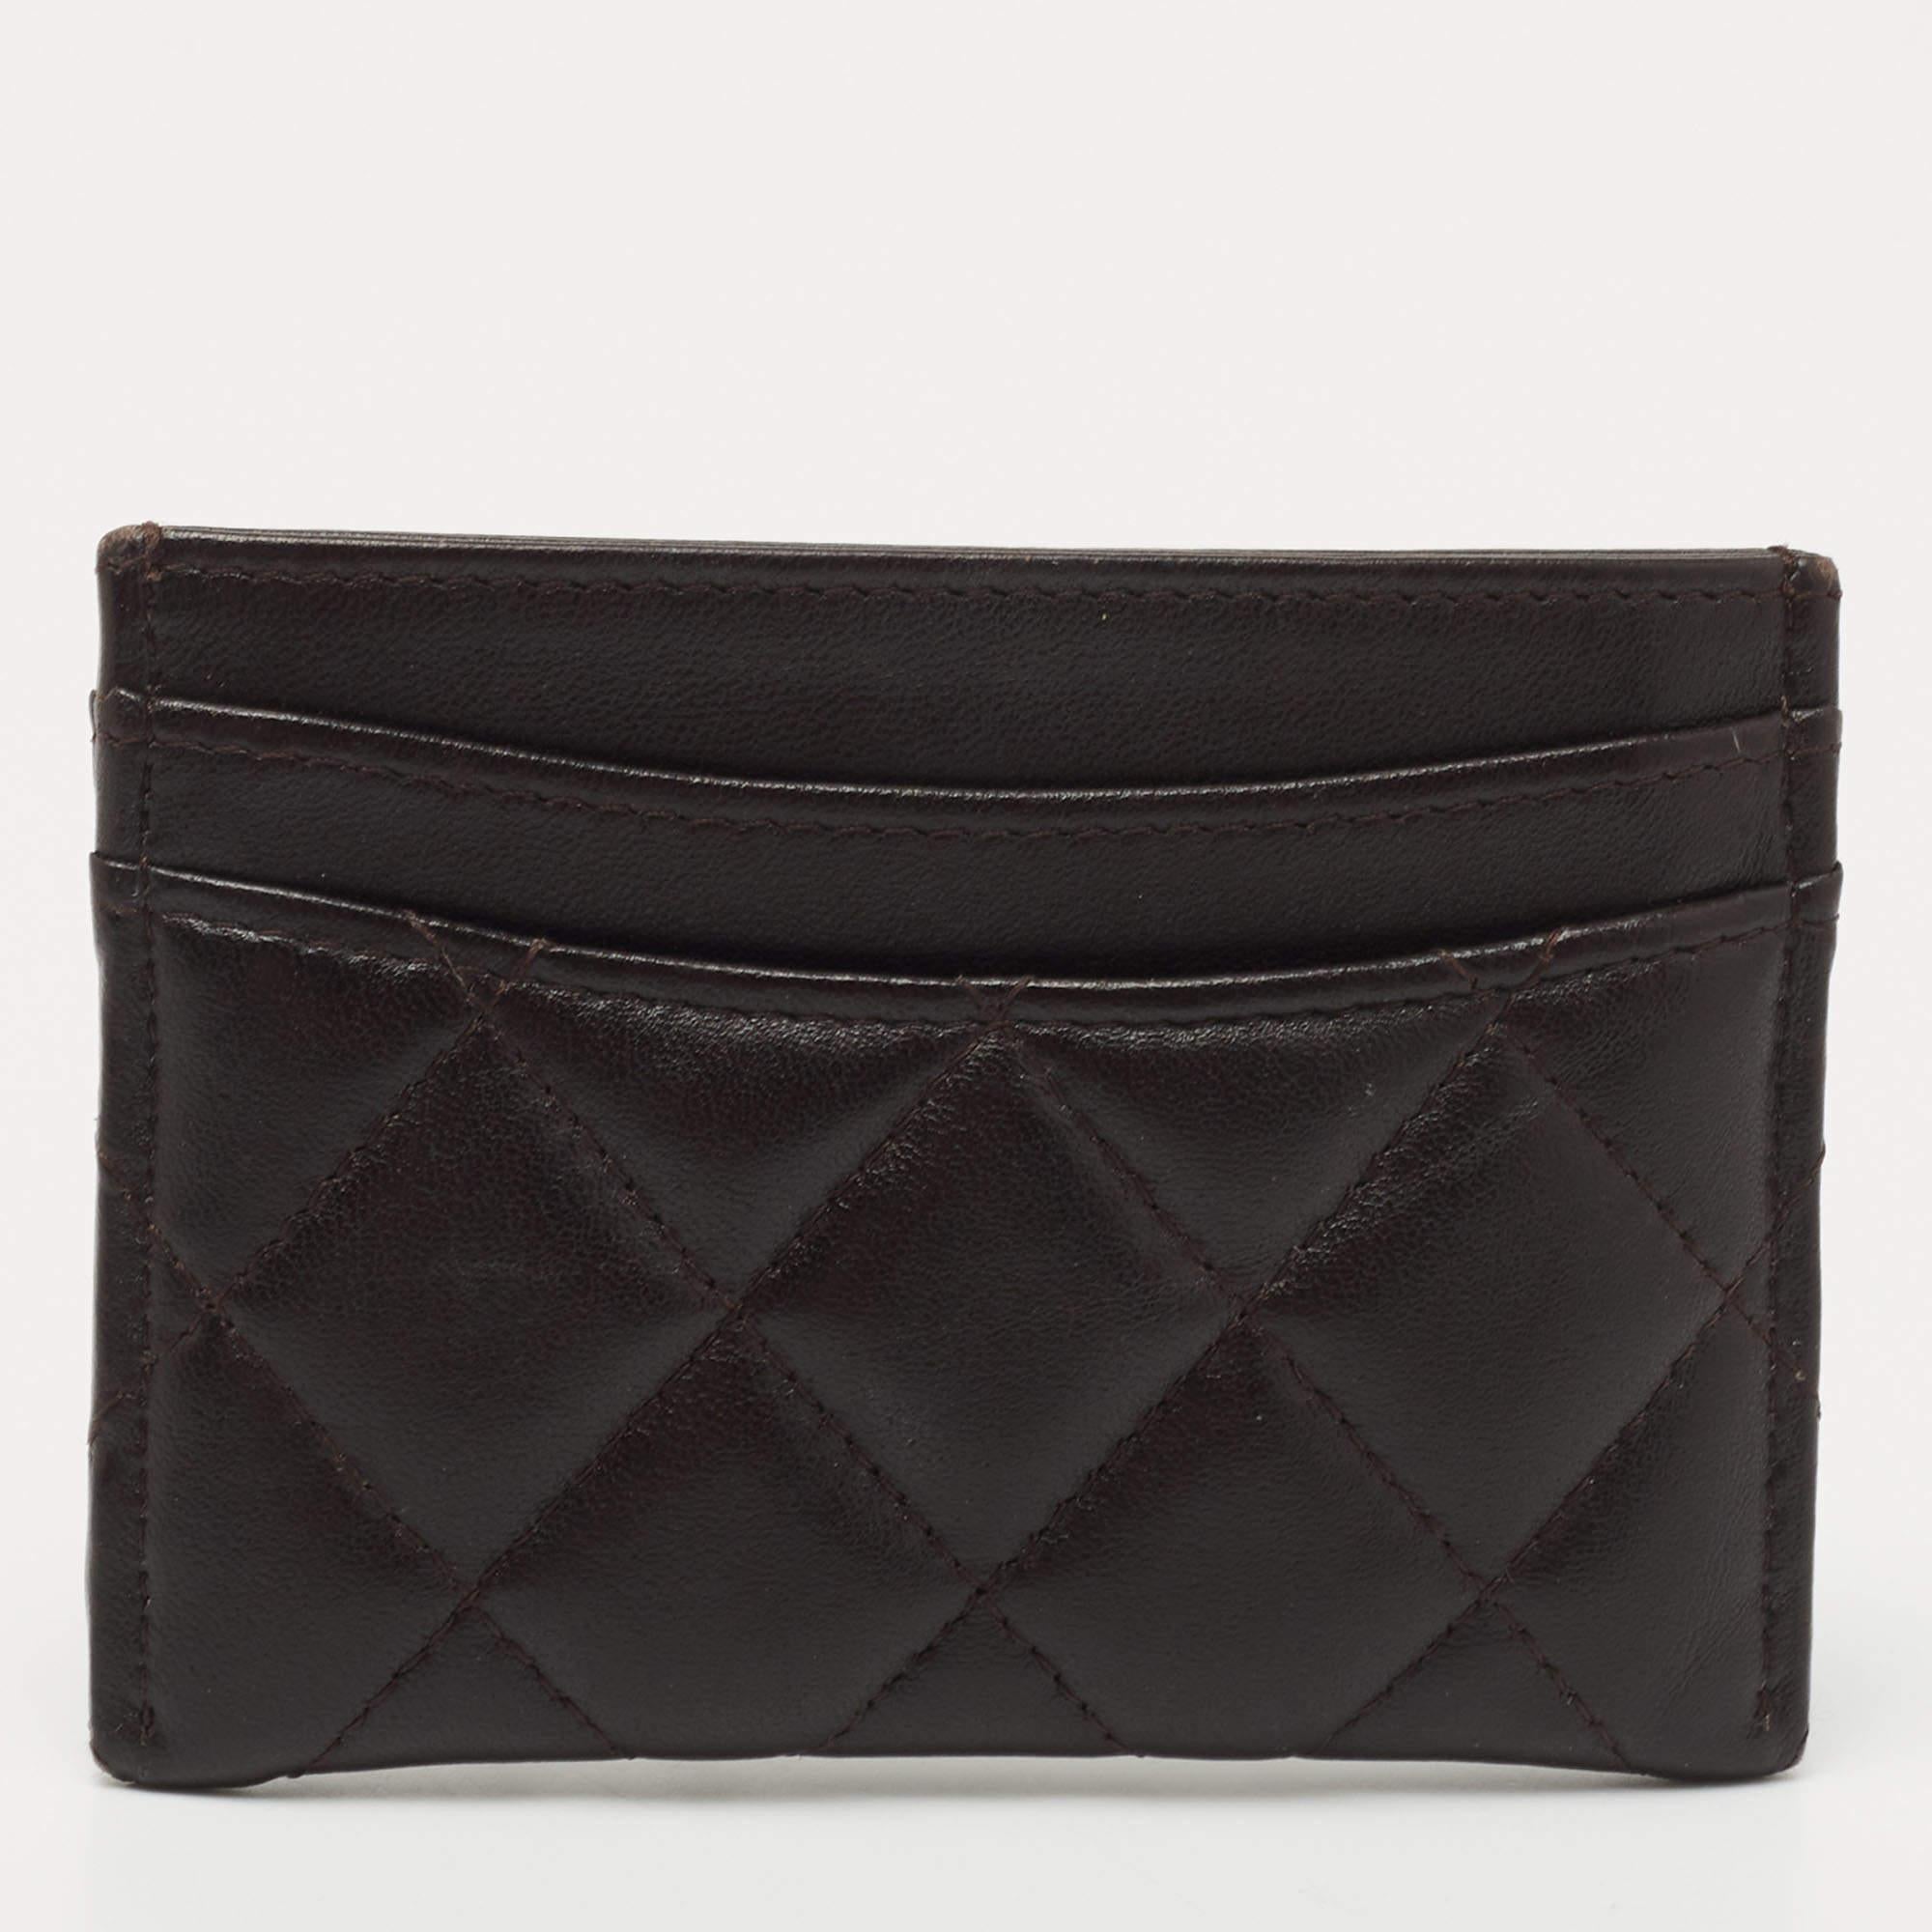 To store all your important cards, this card holder from the House of Chanel is perfect. It has been crafted from black quilted lambskin leather, with a gold-toned CC accent placed on the front.

